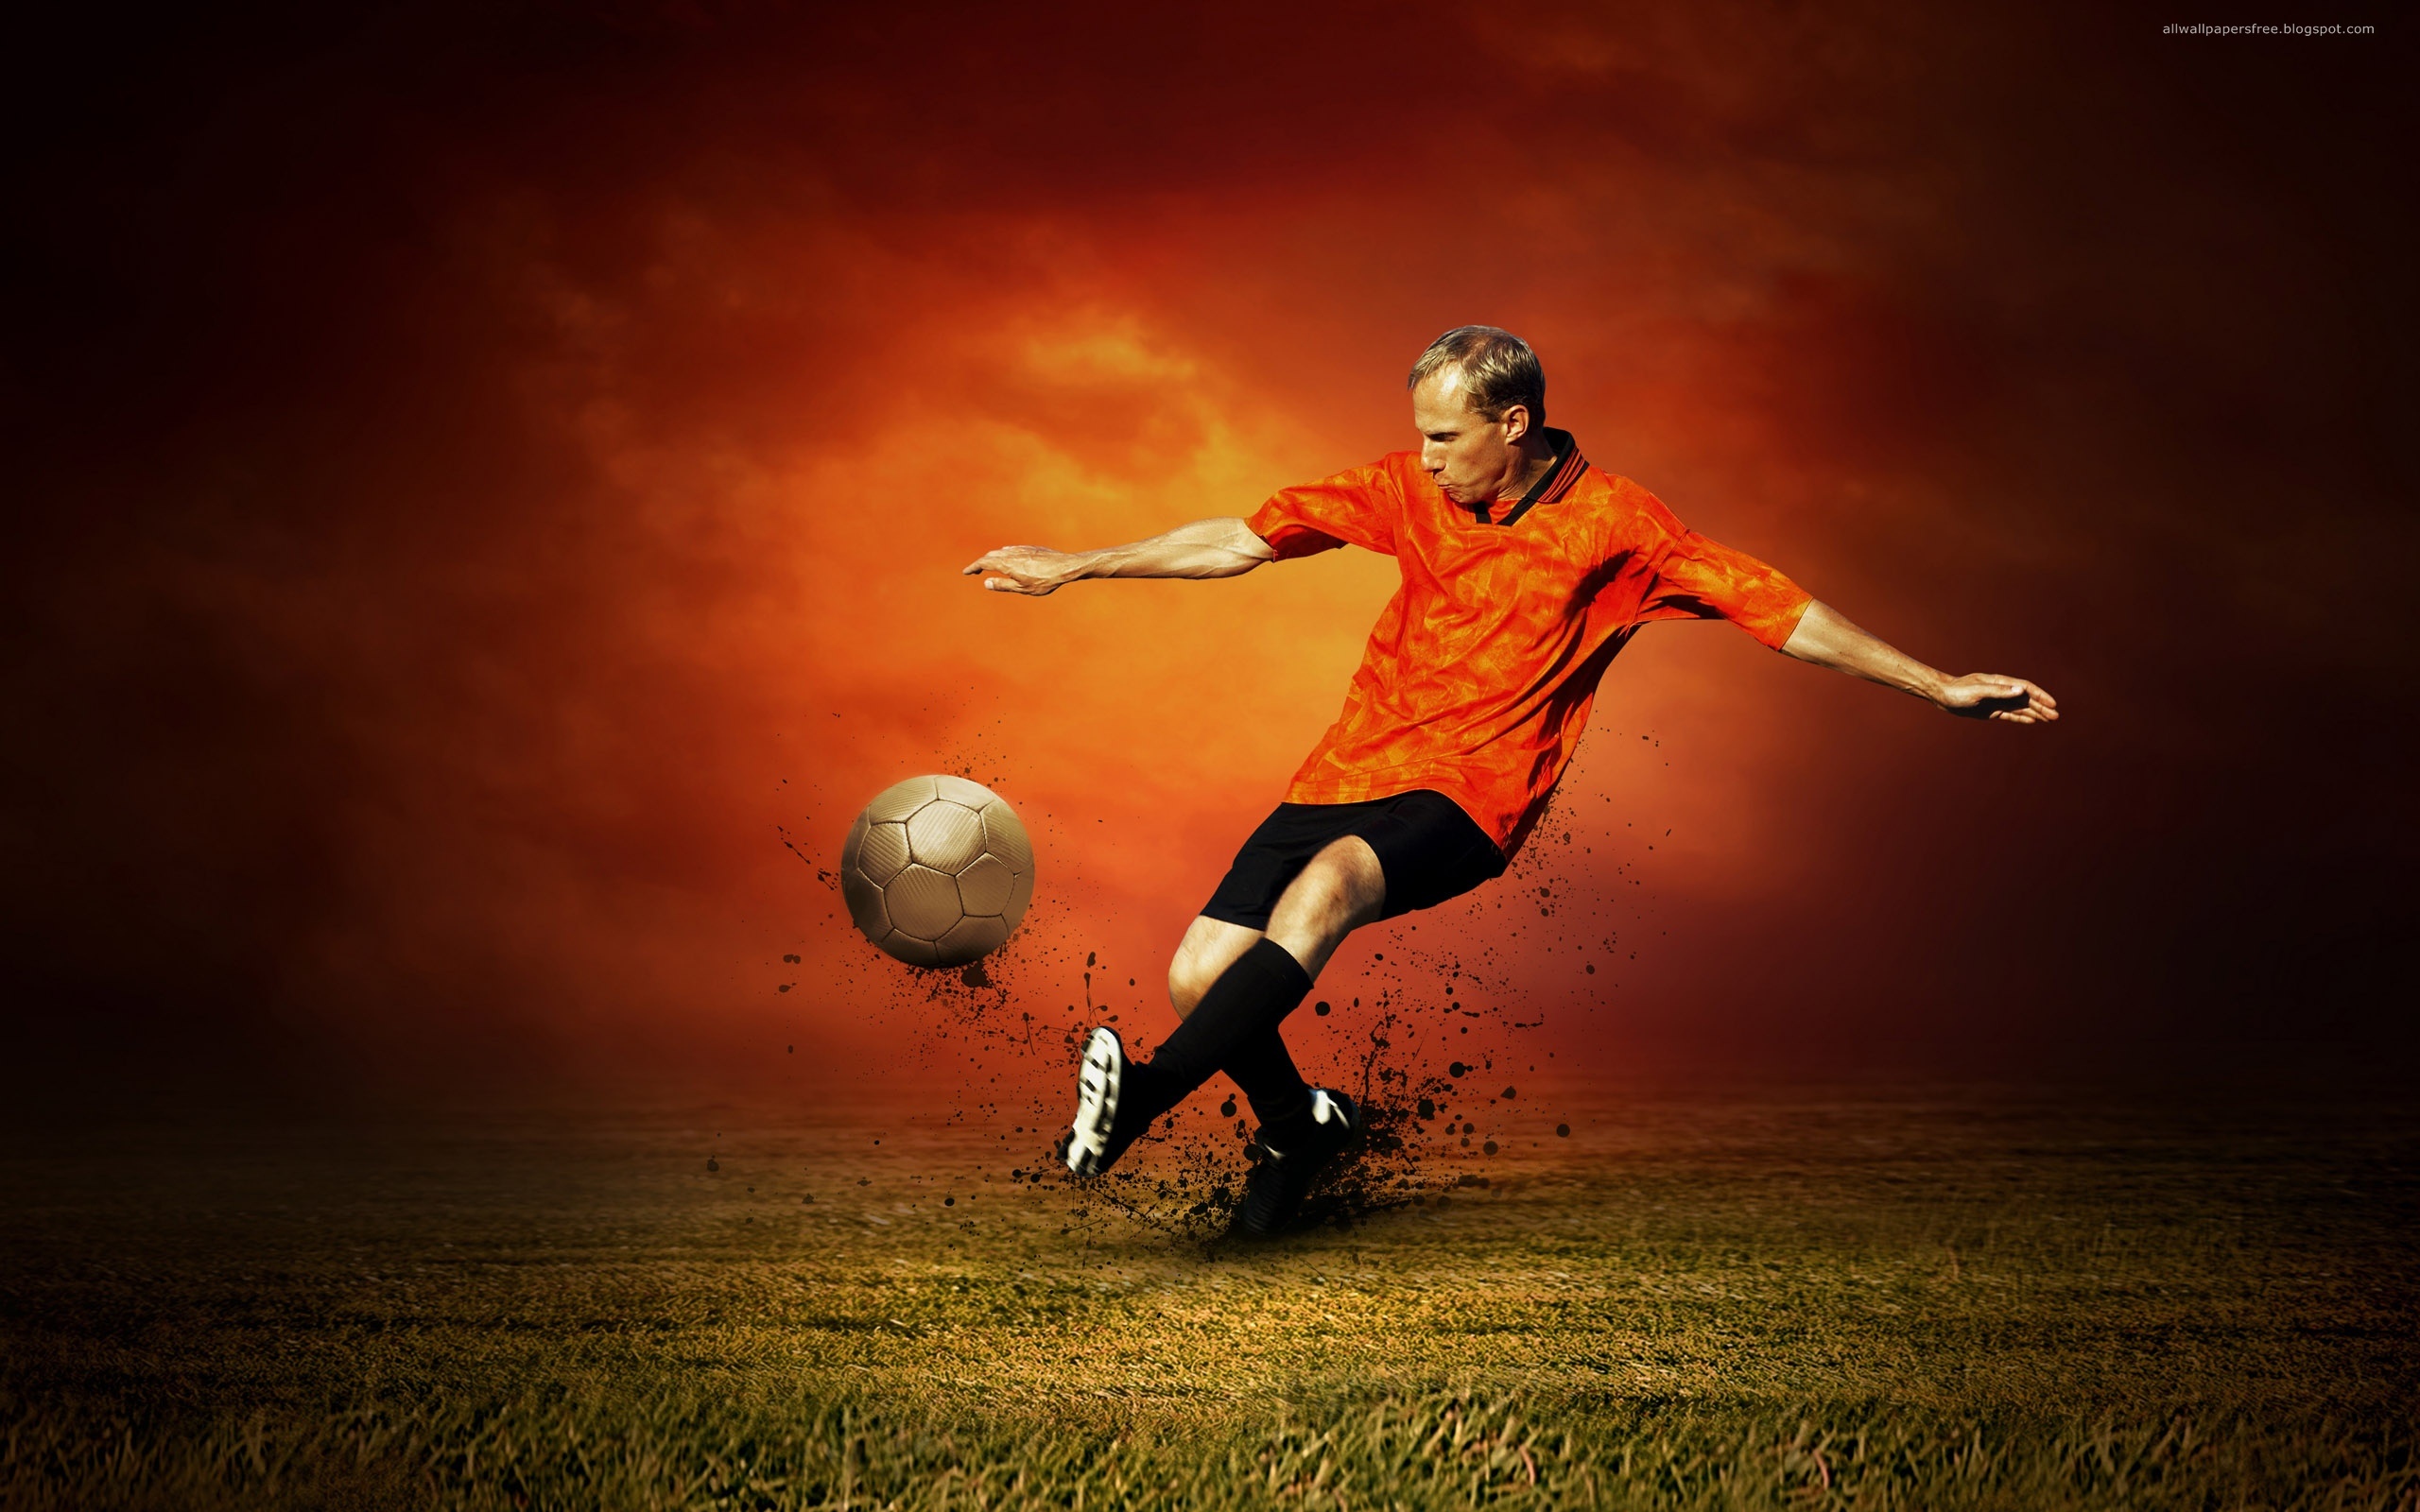 Soccer player in action, representing sports.